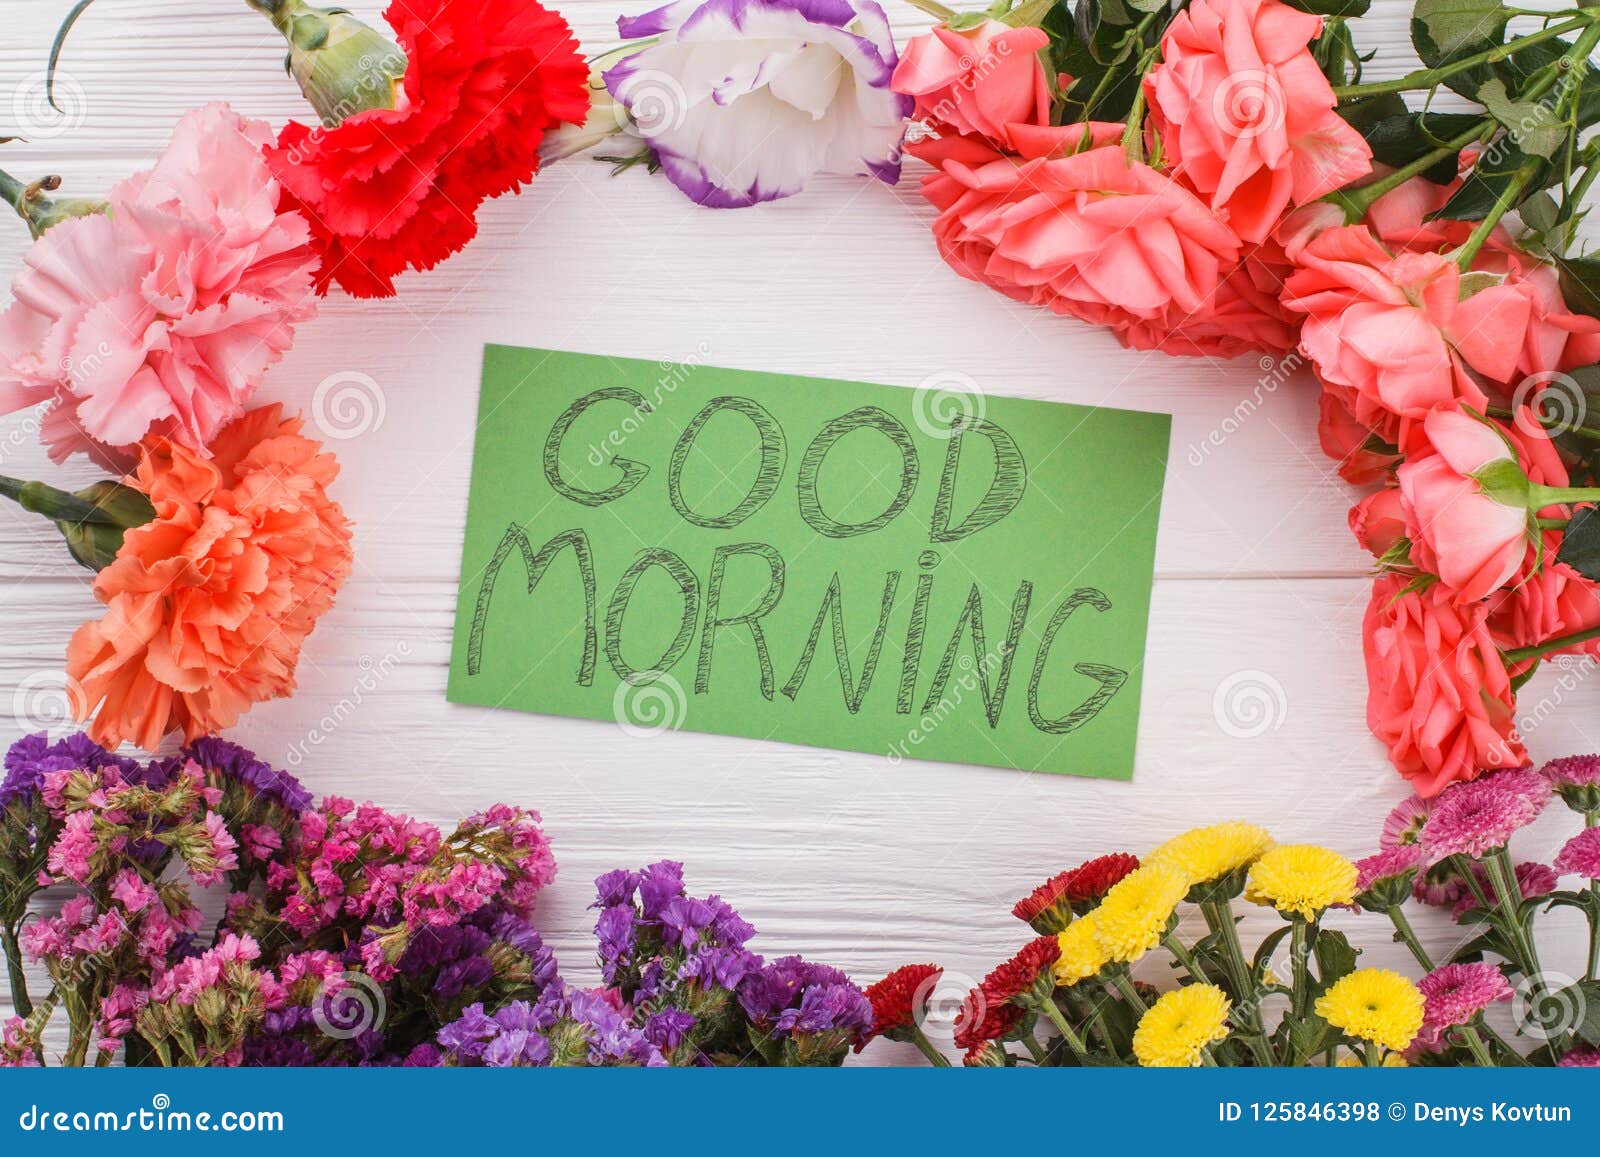 Good Morning Note Amoung Different Flowers. Stock Photo - Image of ...